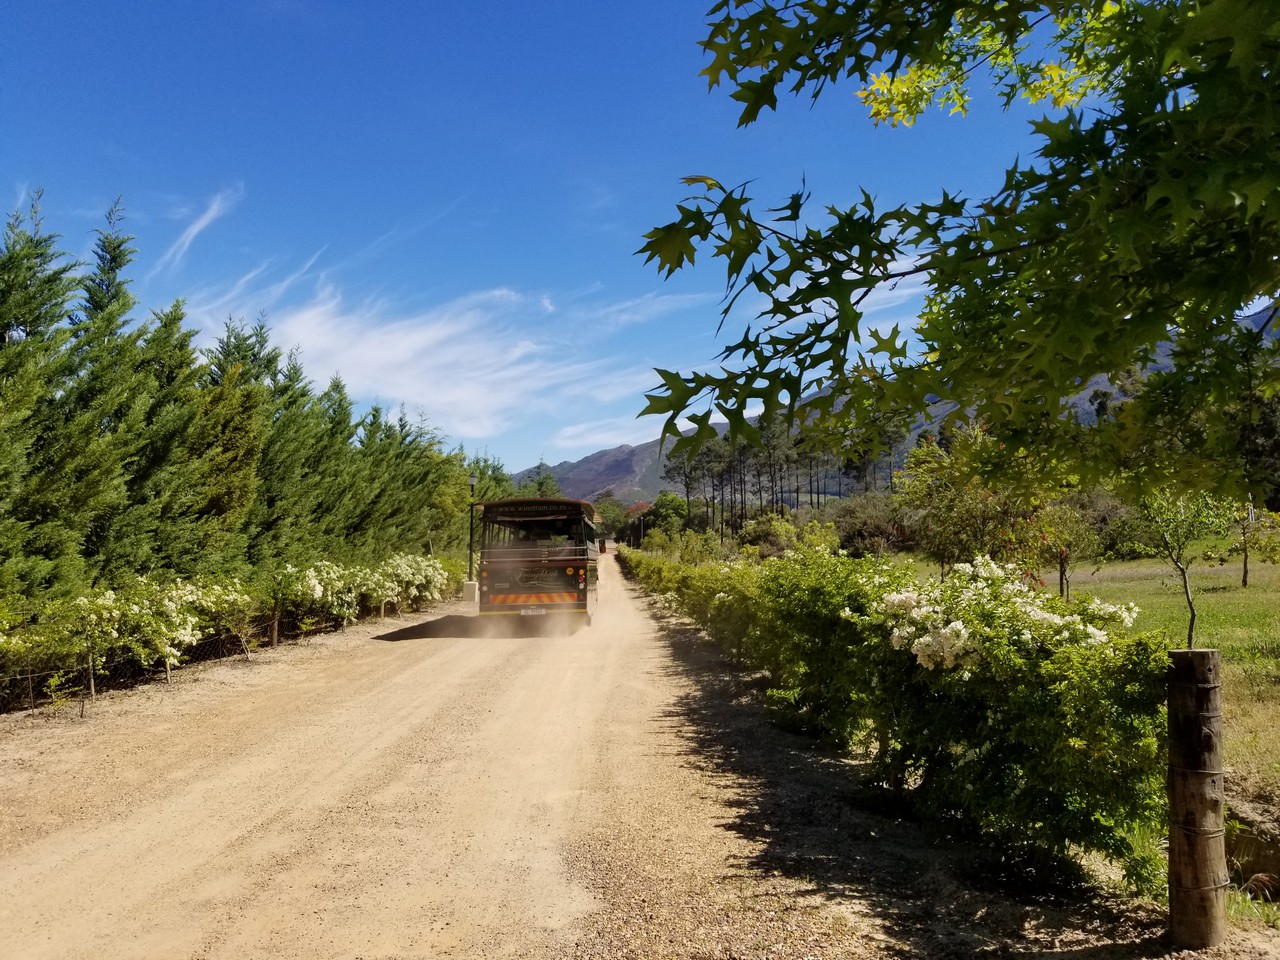 a truck driving on a dirt road